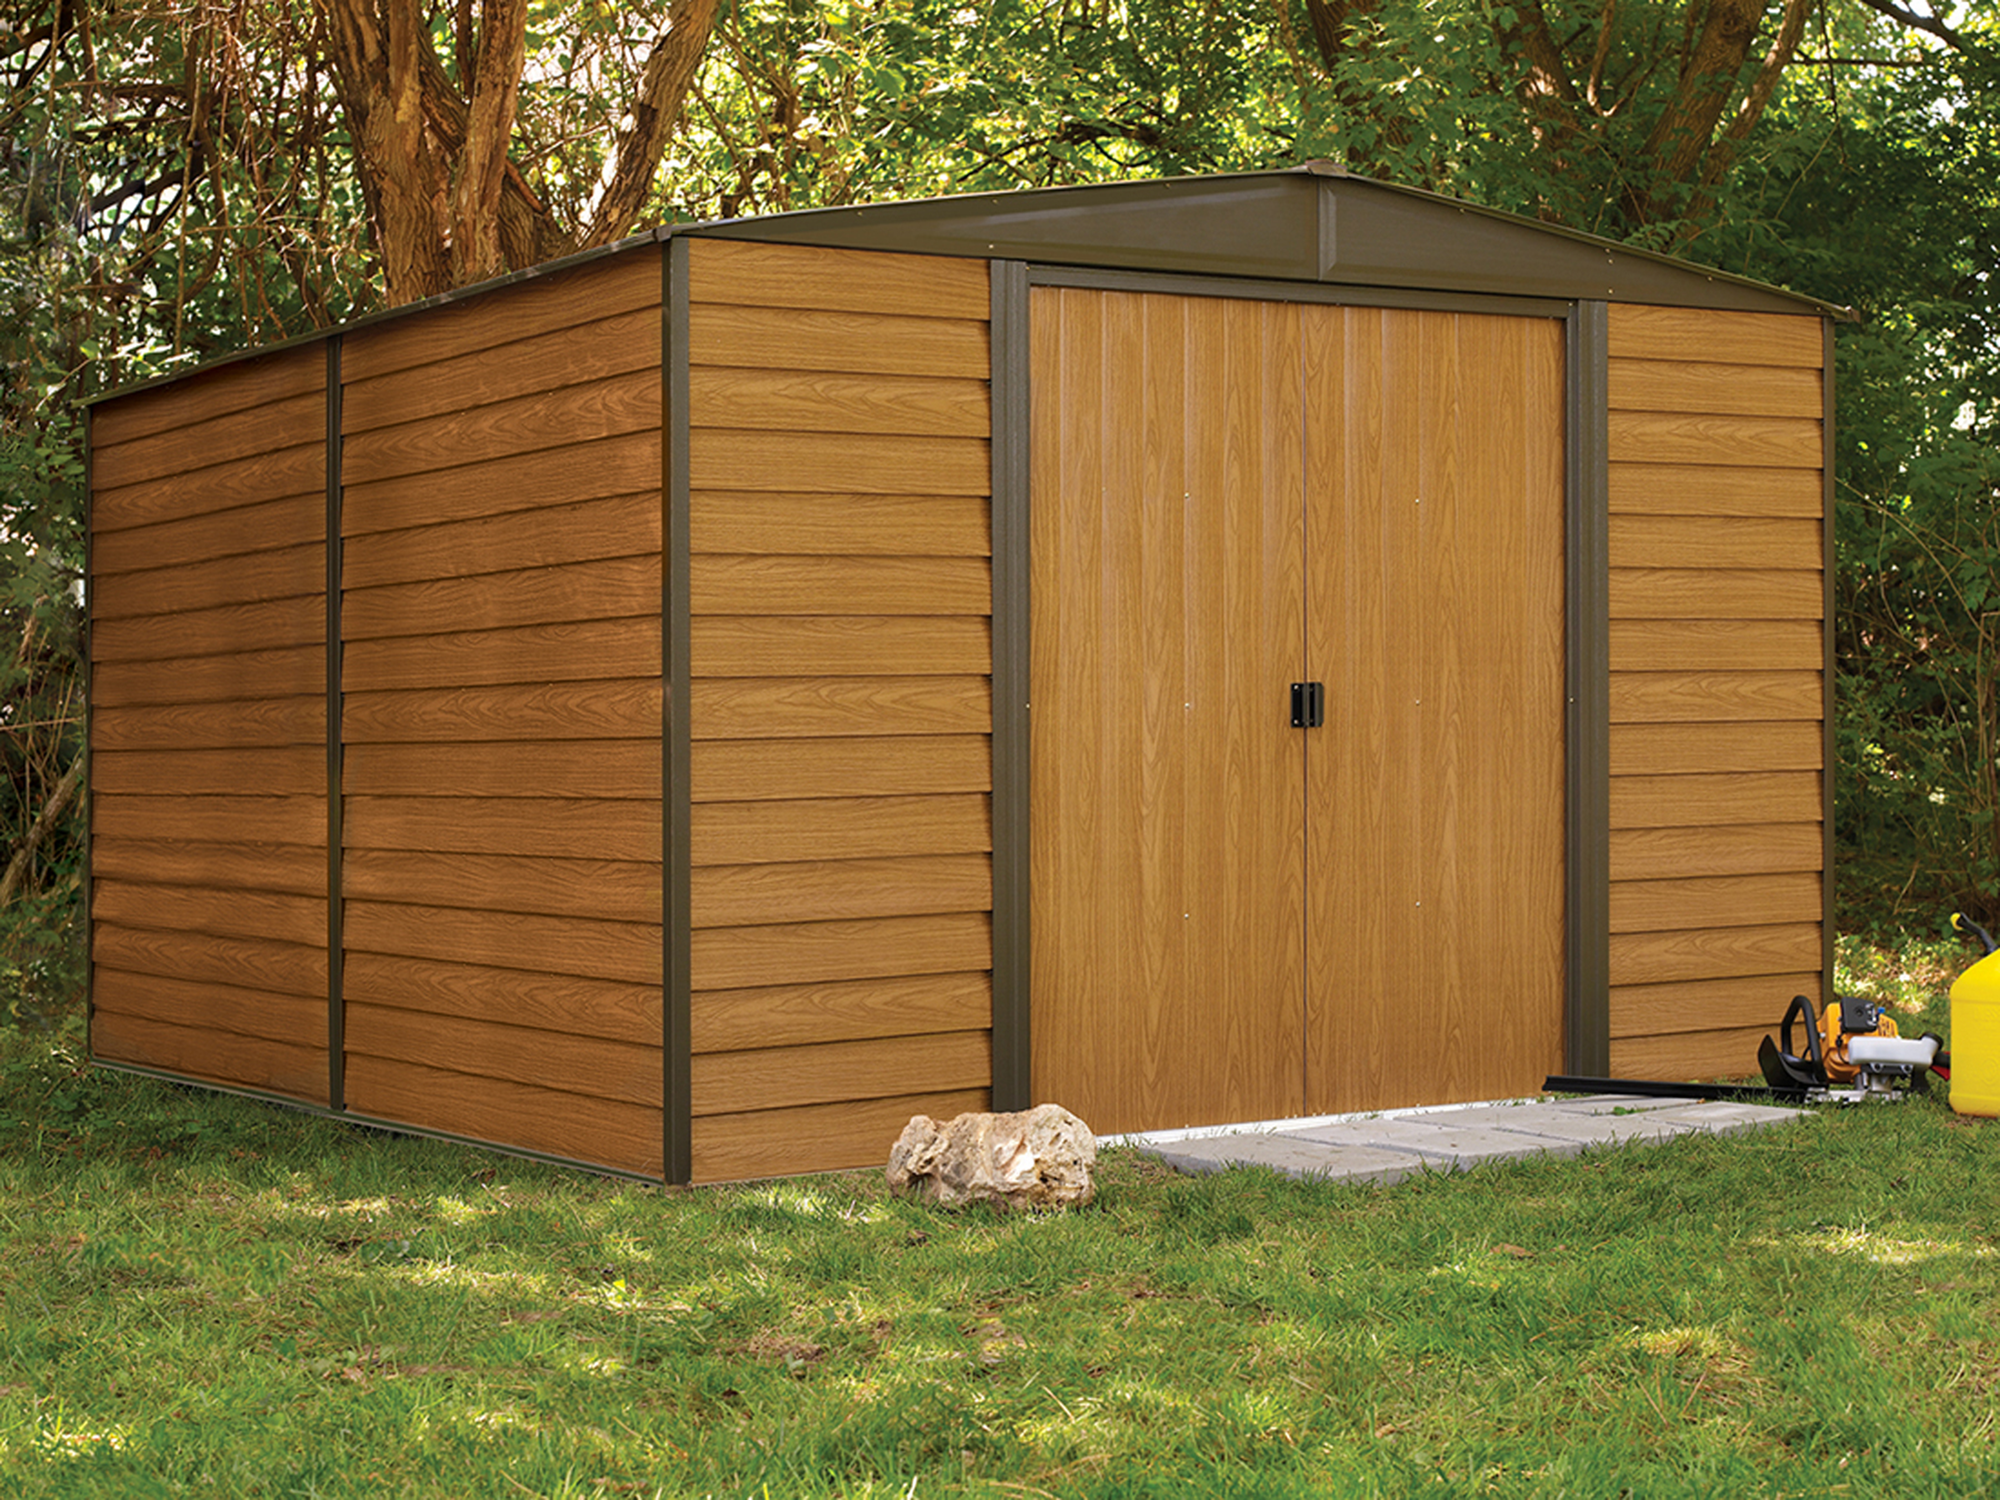 Steel Storage Shed Wood Finish – Grizzly Shelter Ltd.